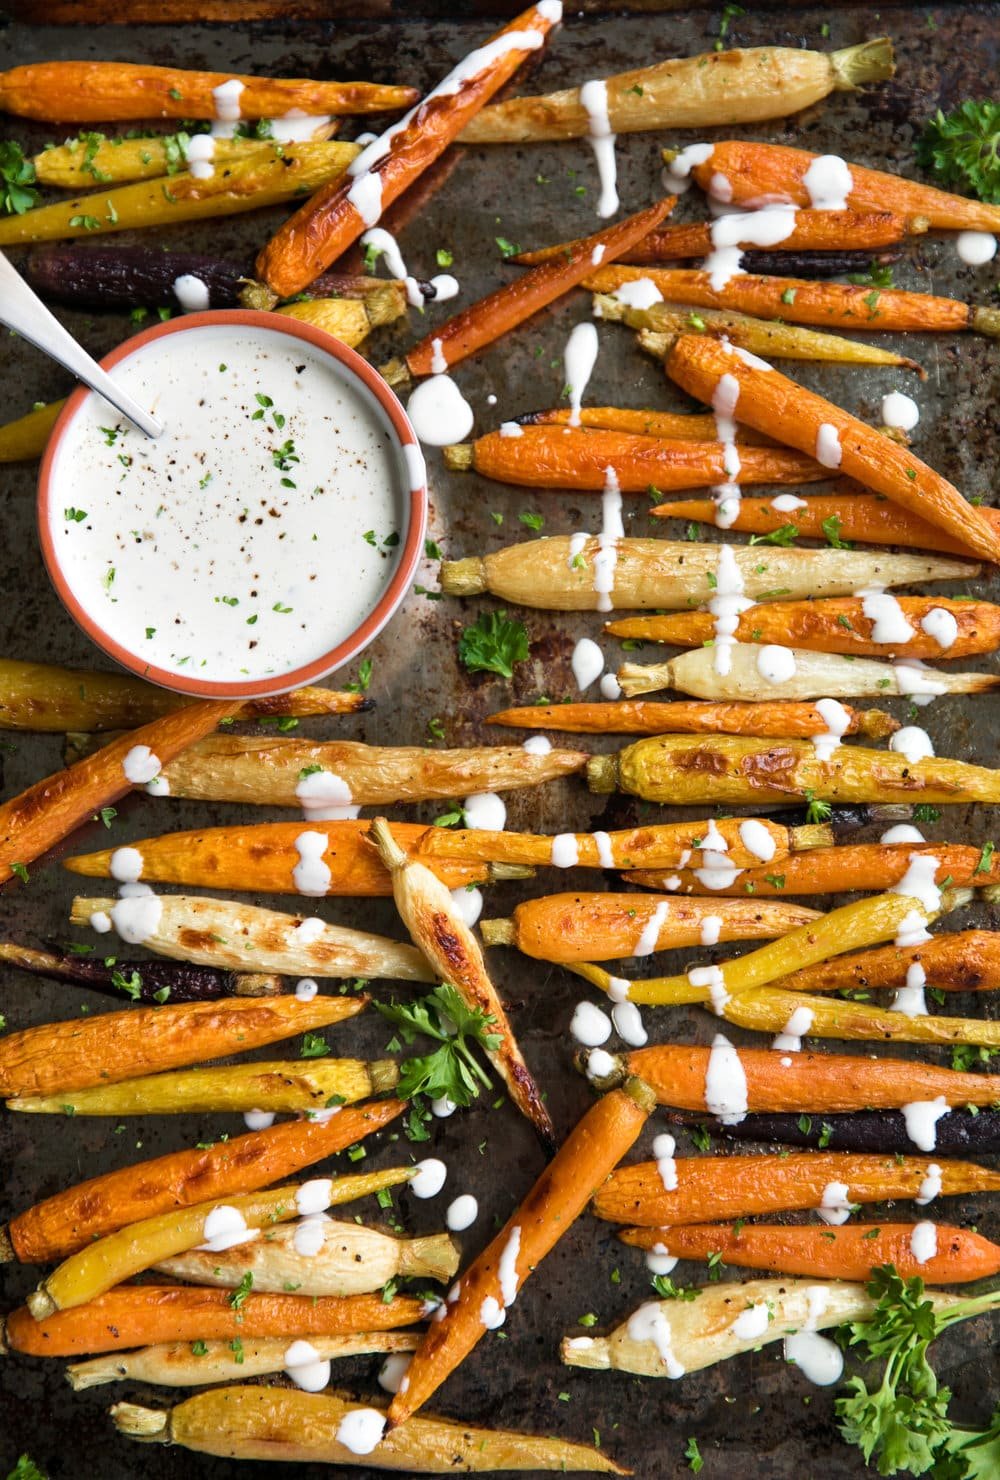 A pile of roasted carrots